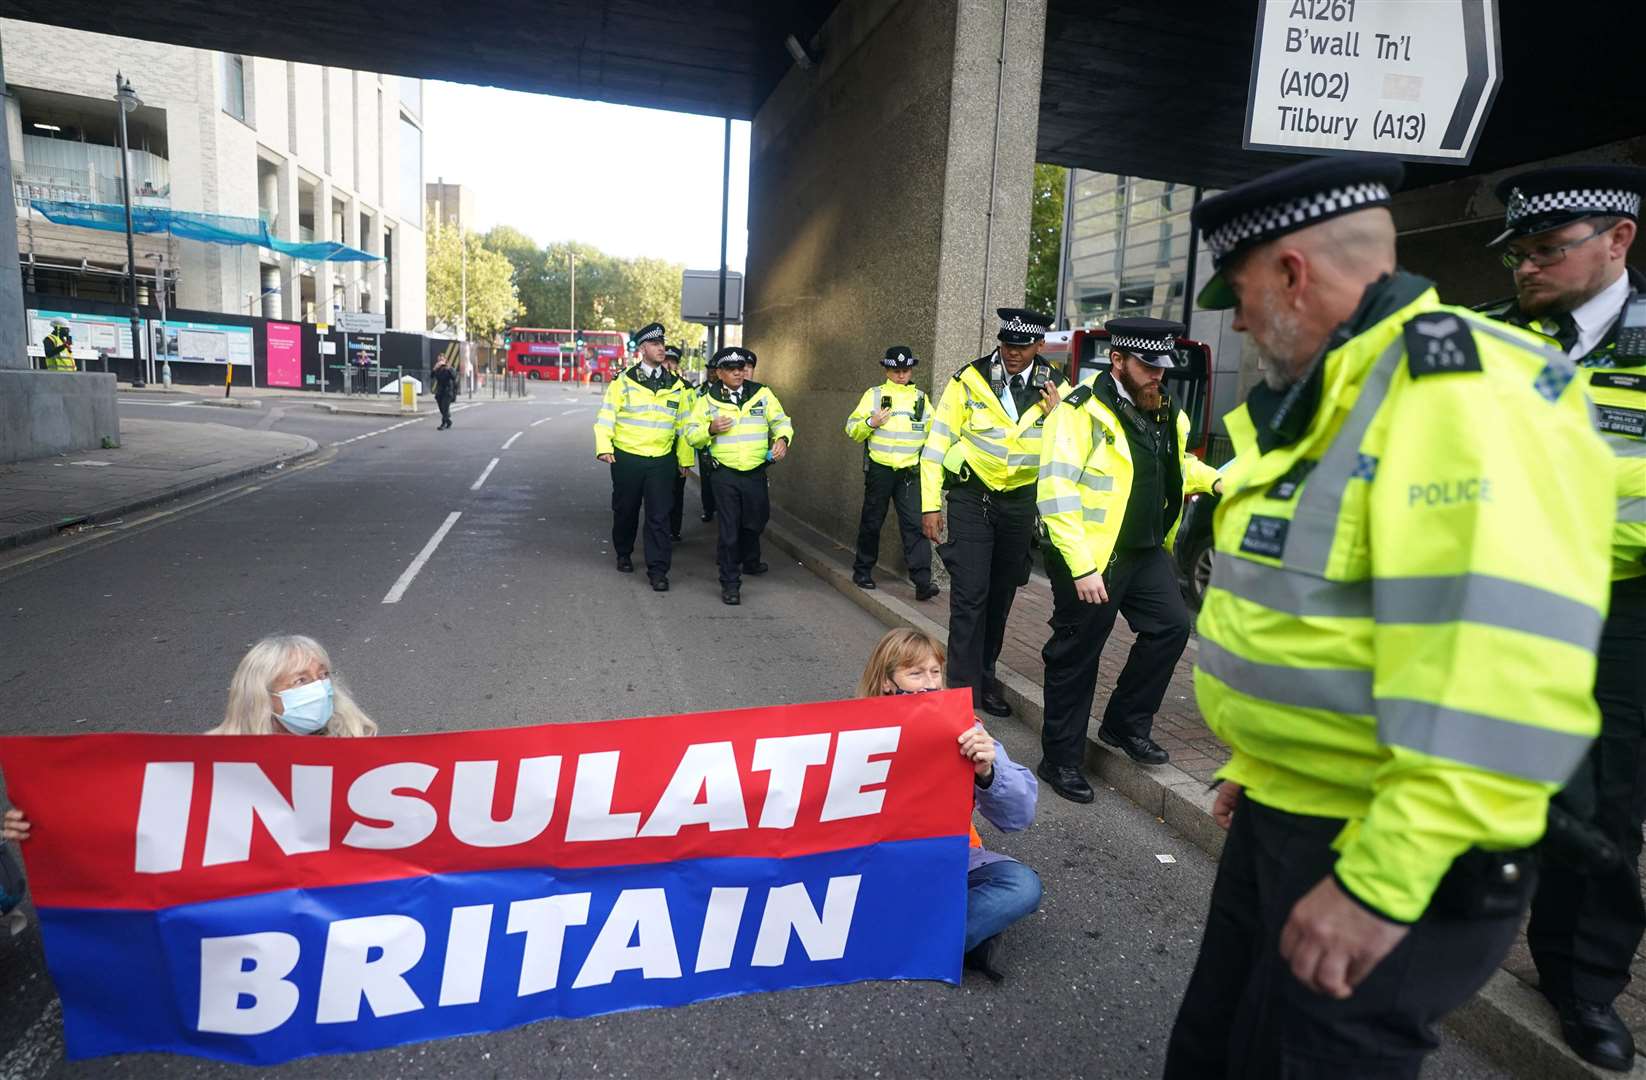 Protesters from Insulate Britain block a road near Canary Wharf in east London (Victoria Jones/PA)